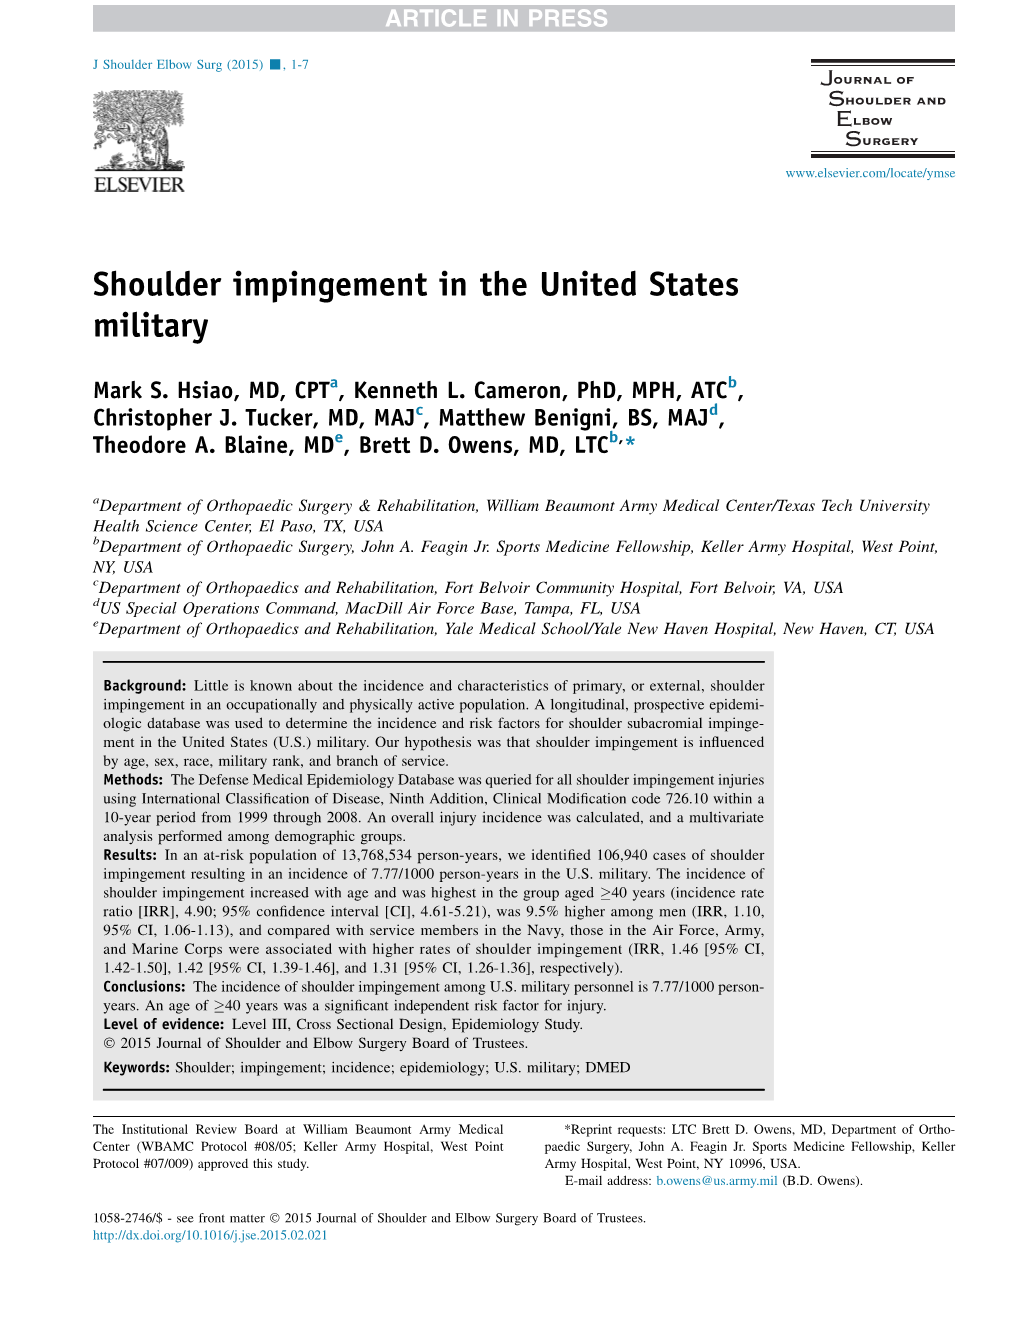 Shoulder Impingement in the United States Military